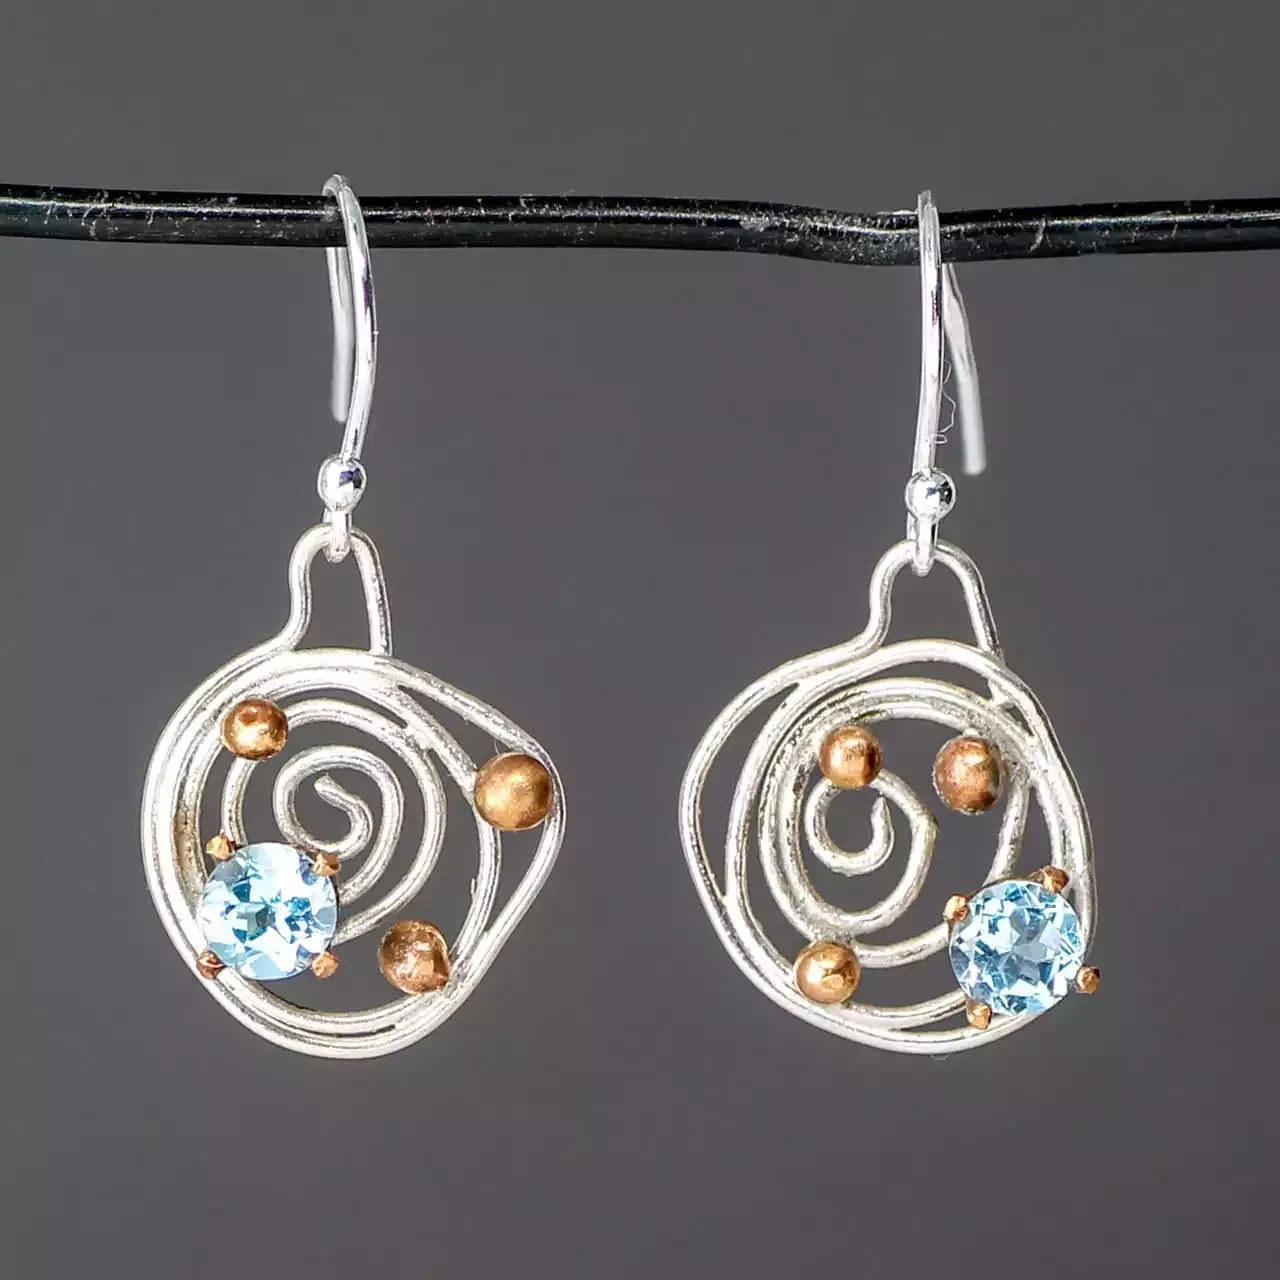 Bejewelled Squiggle Topaz, Silver and Bronze Drop Earrings by Xuella Arnold